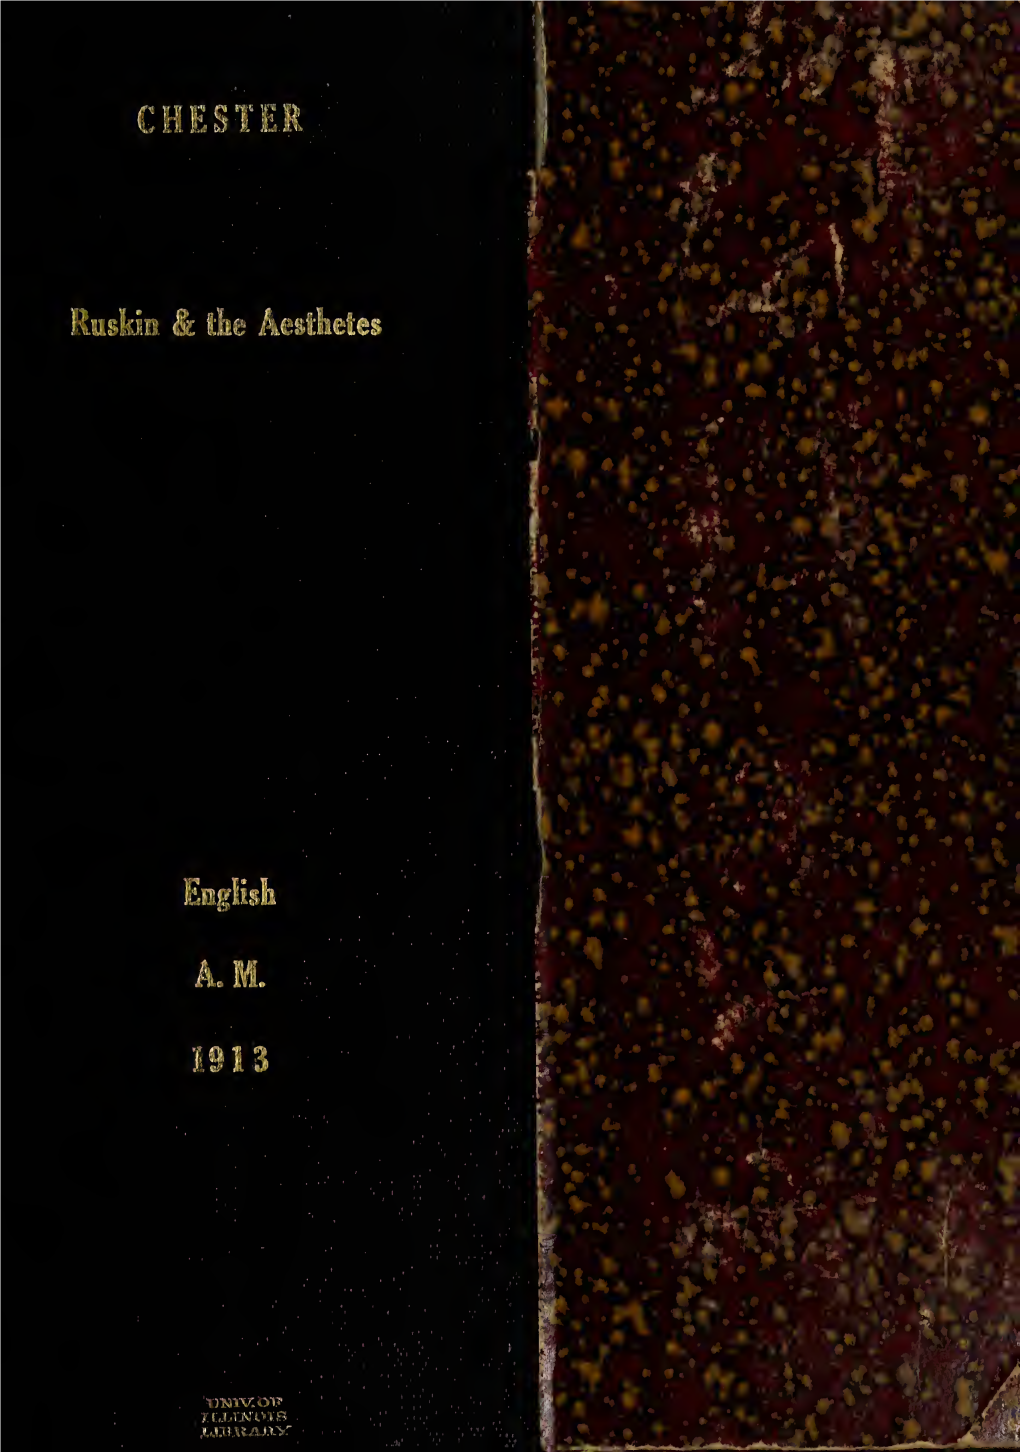 Ruskin and the Aesthetes